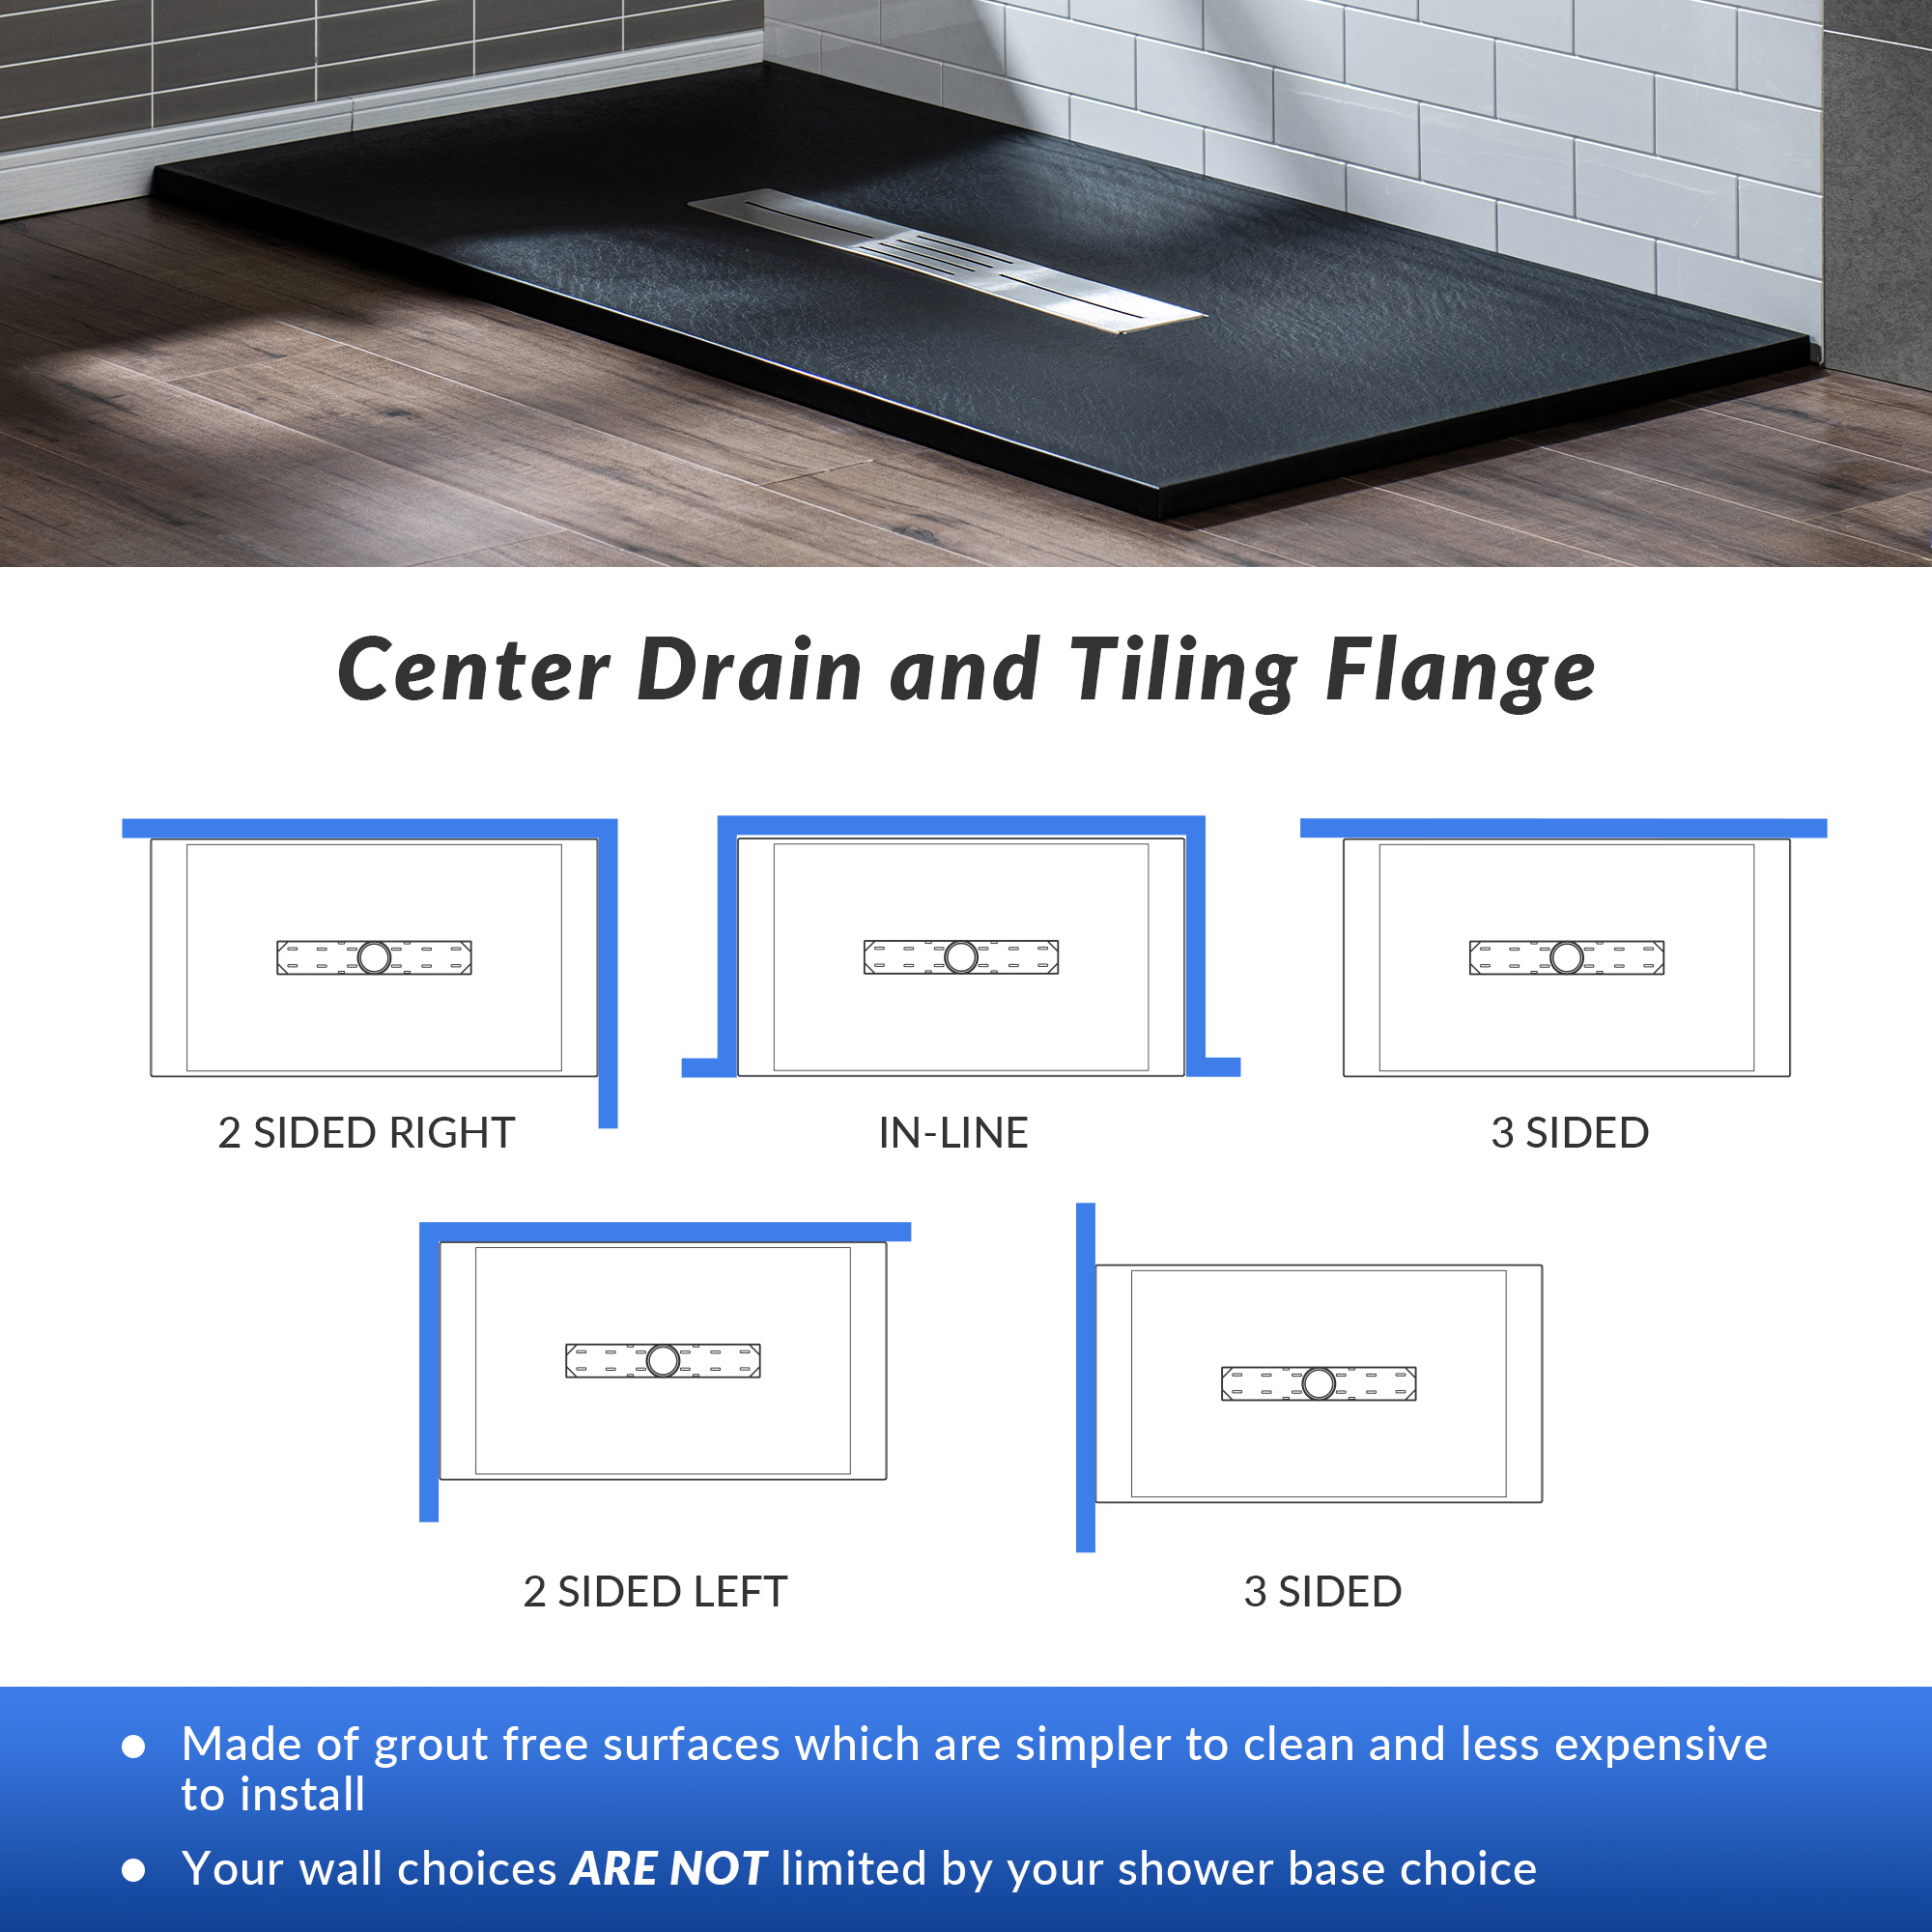  WOODBRIDGE 60-in L x 32-in W Zero Threshold End Drain Shower Base with Center Drain Placement, Matching Decorative Drain Plate and Tile Flange, Wheel Chair Access, Low Profile, Black_15111